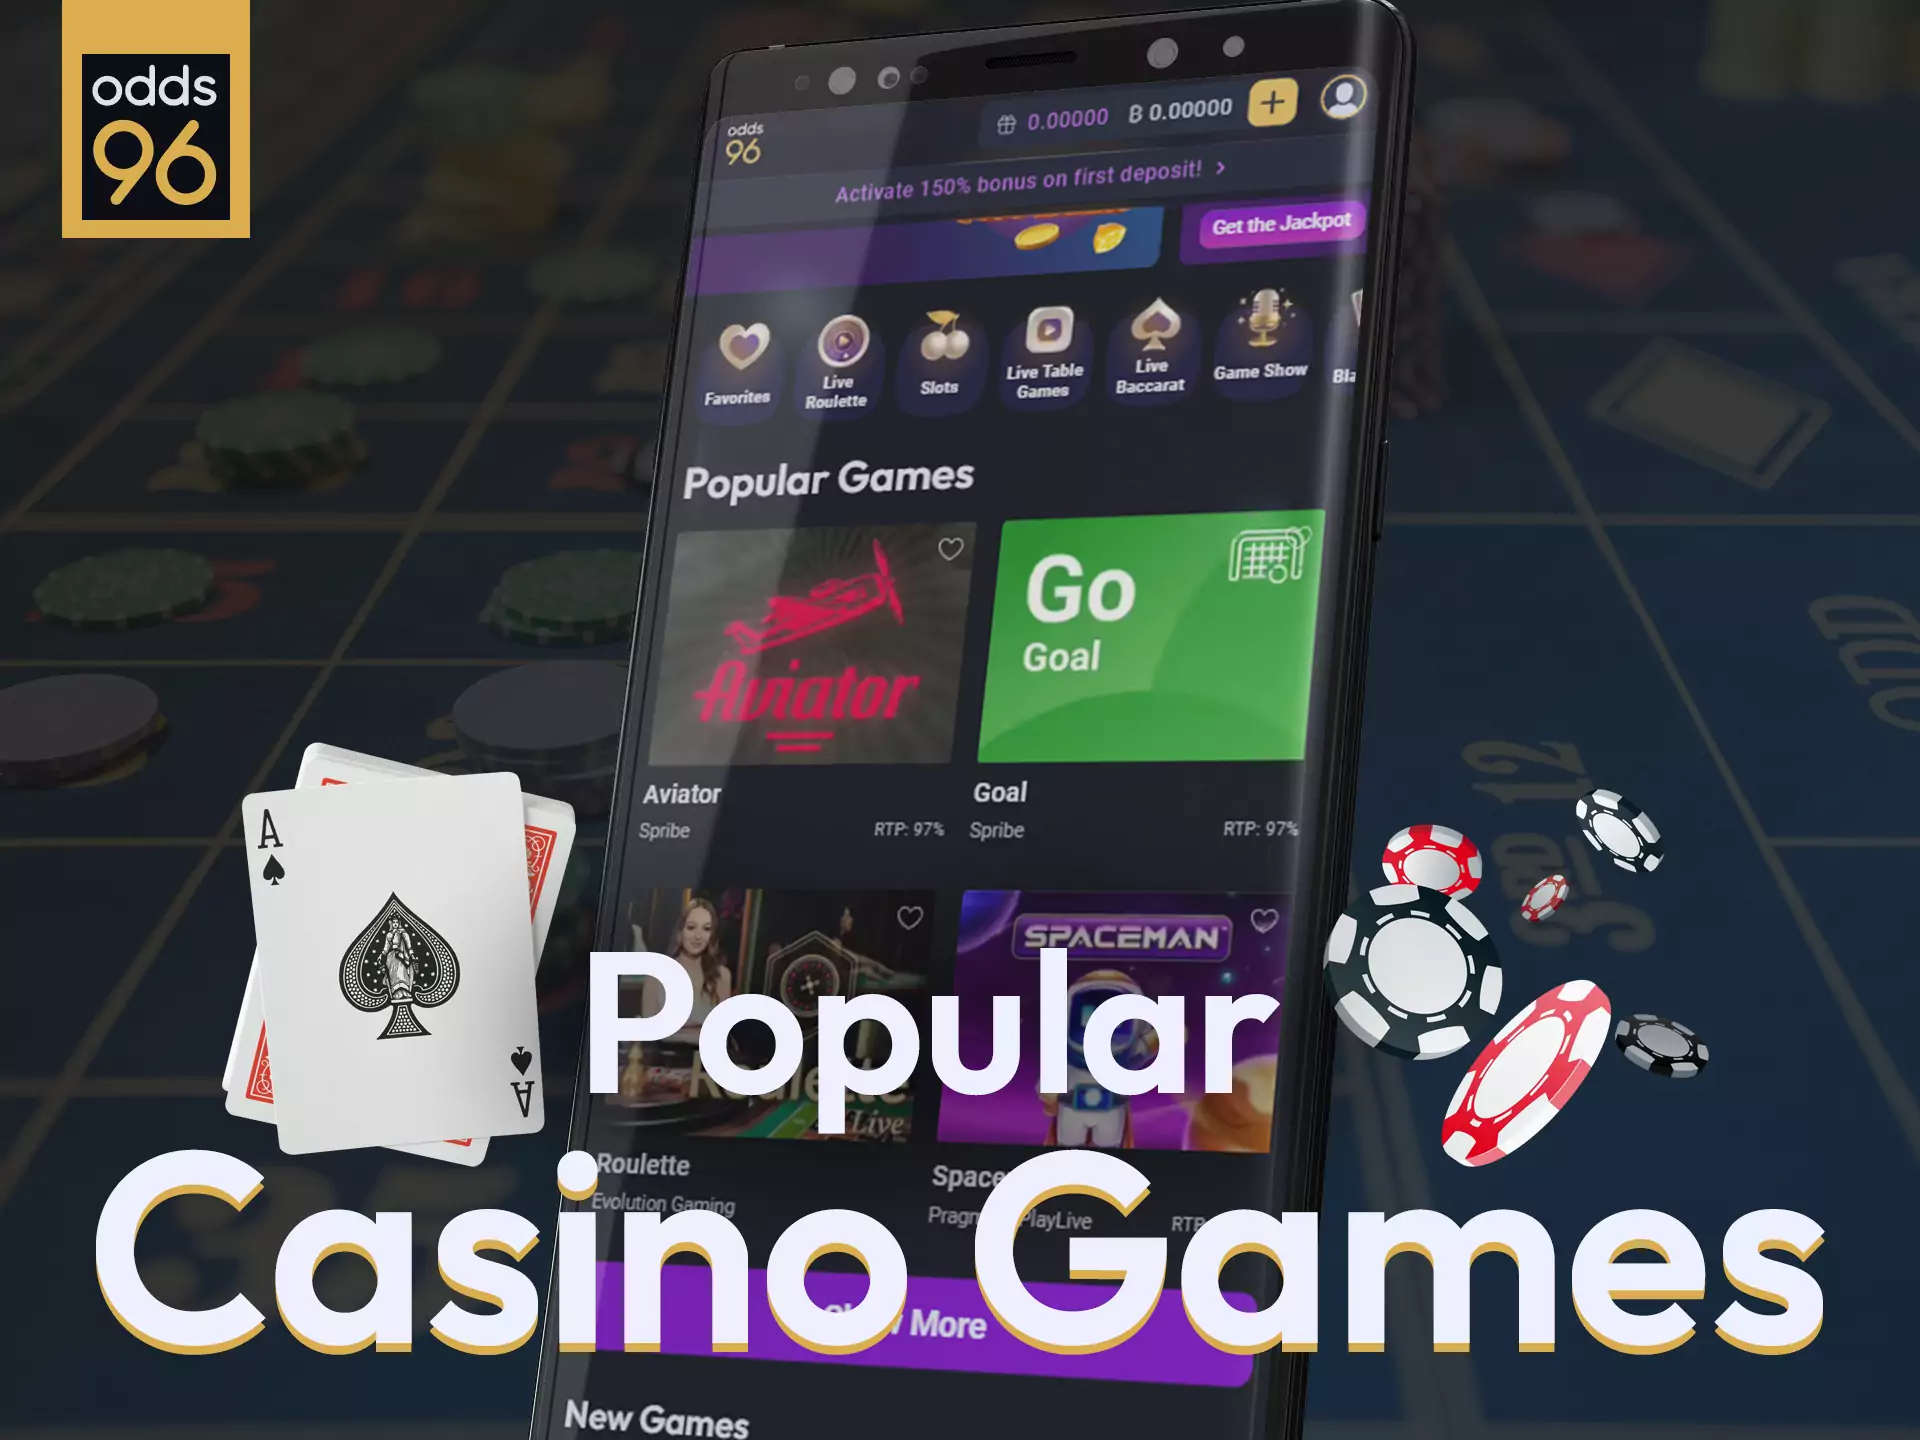 Play the most popular casino games in Odds96.